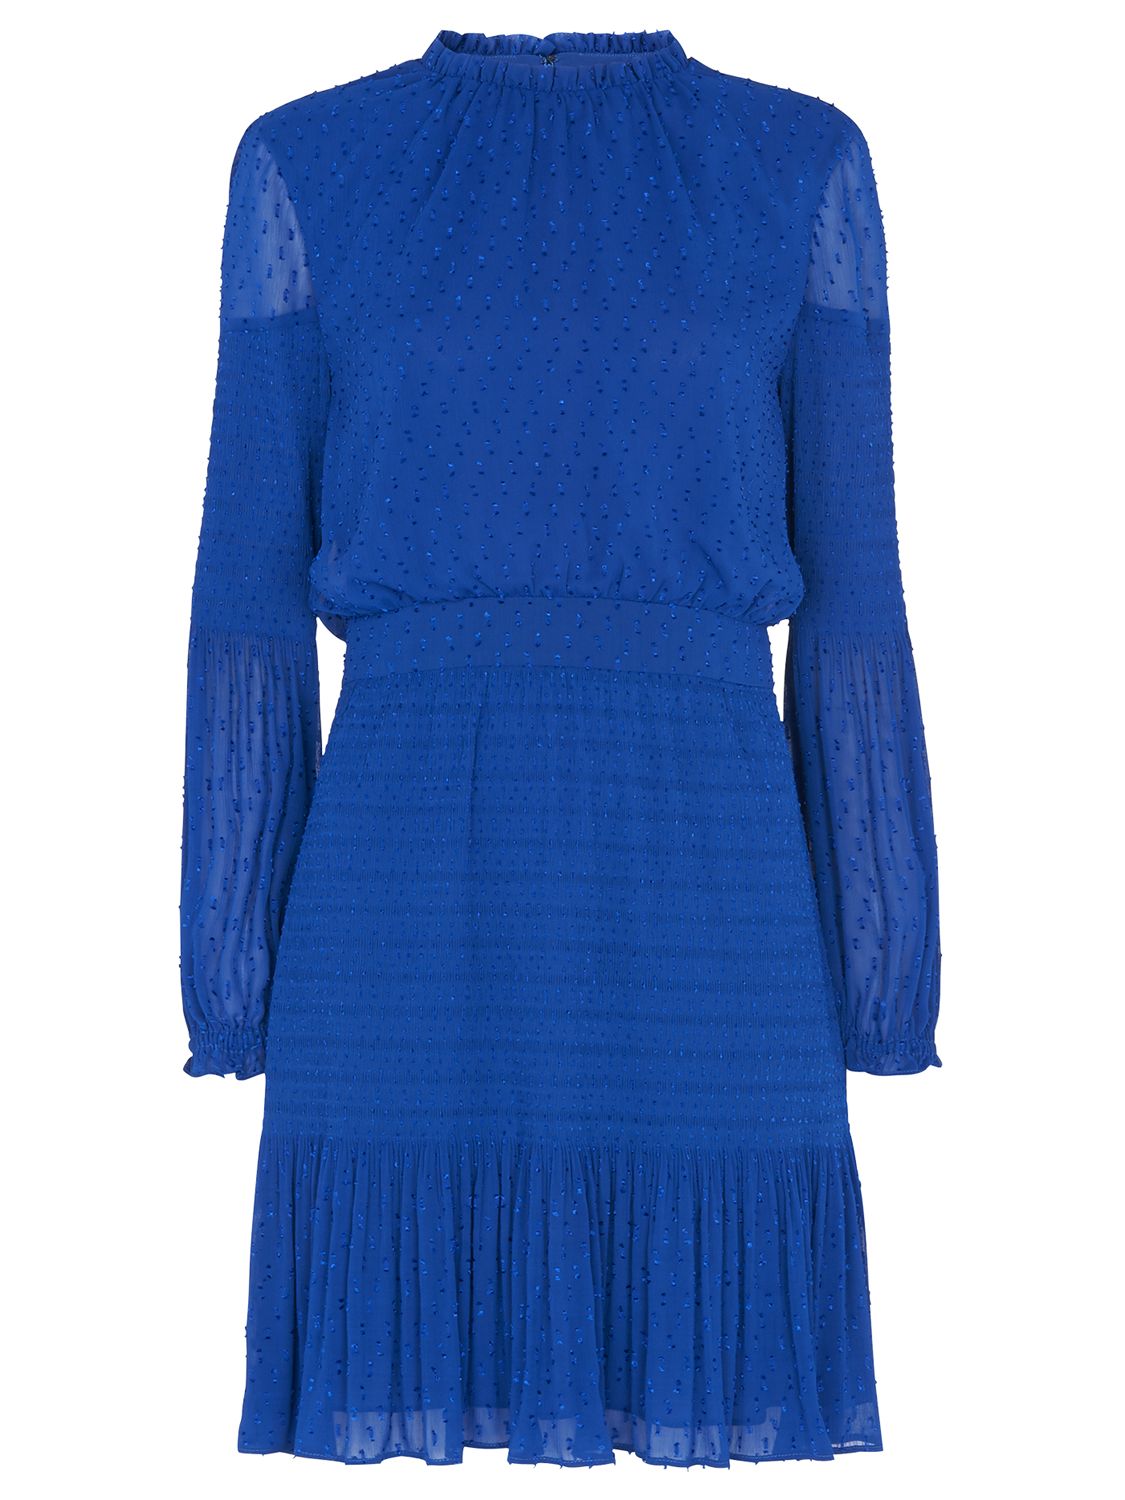 Whistles Oriel Dobby Pleated Dress, Blue at John Lewis & Partners